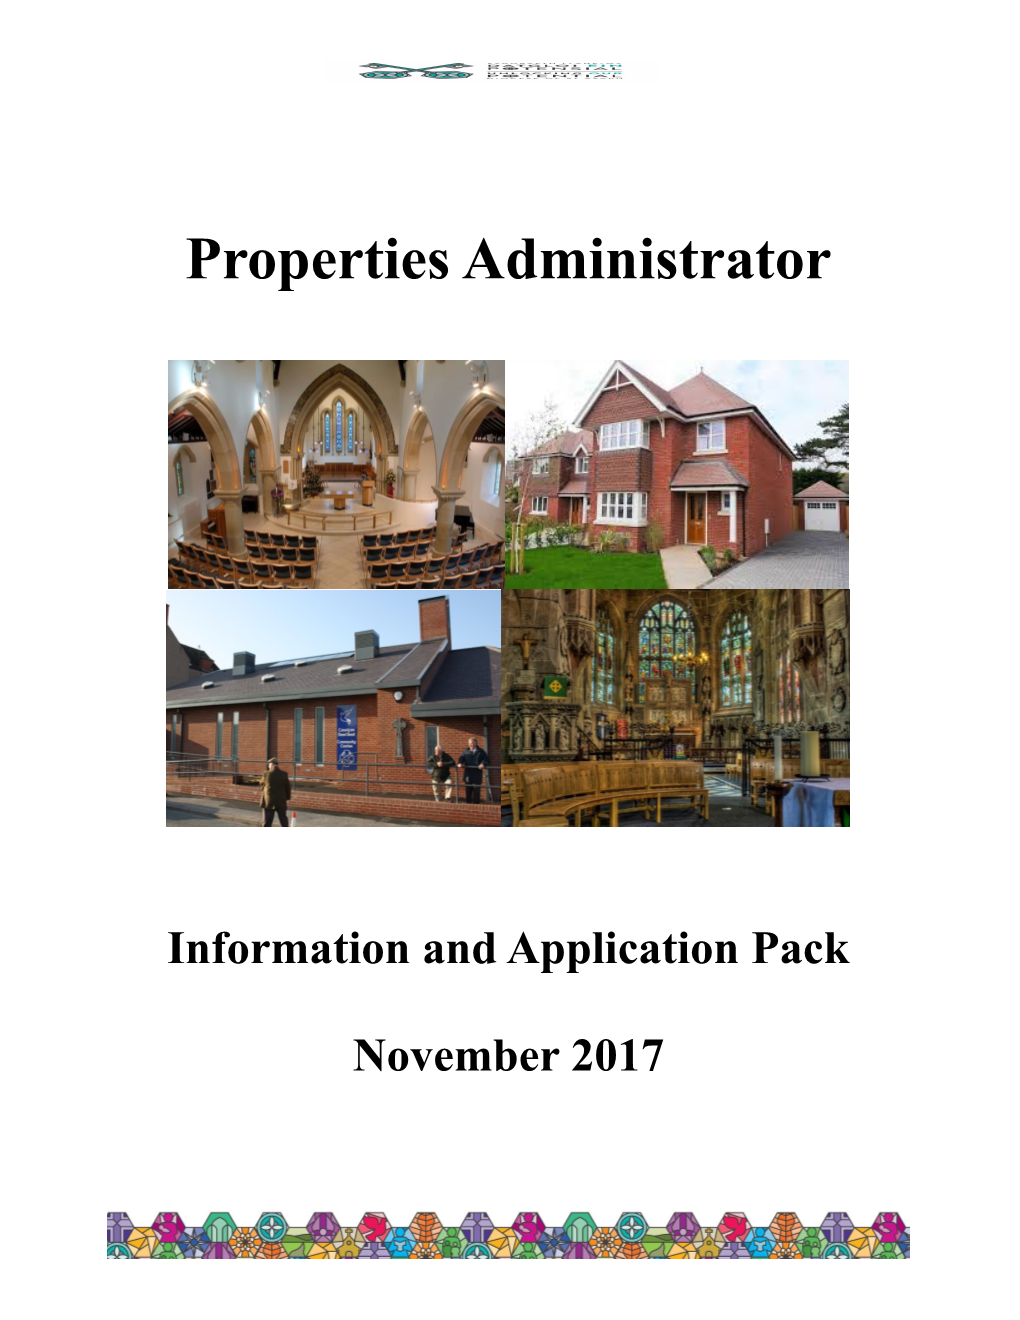 Information and Application Pack